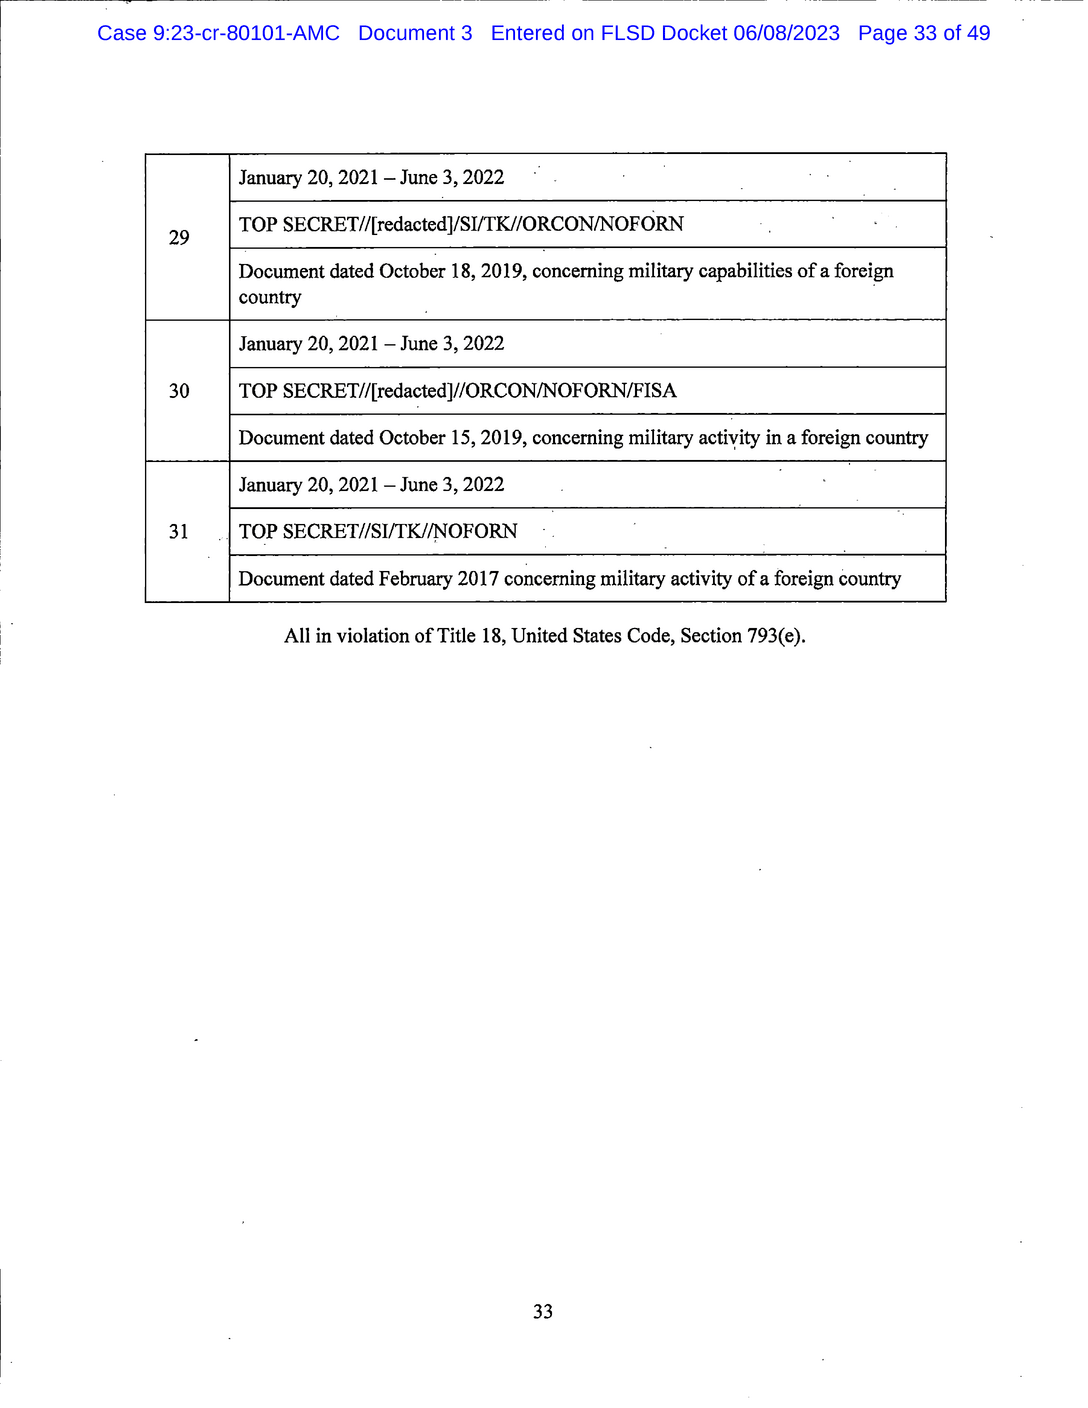 Page 33 of Donald Trump Classified Documents Indictment PDF document.